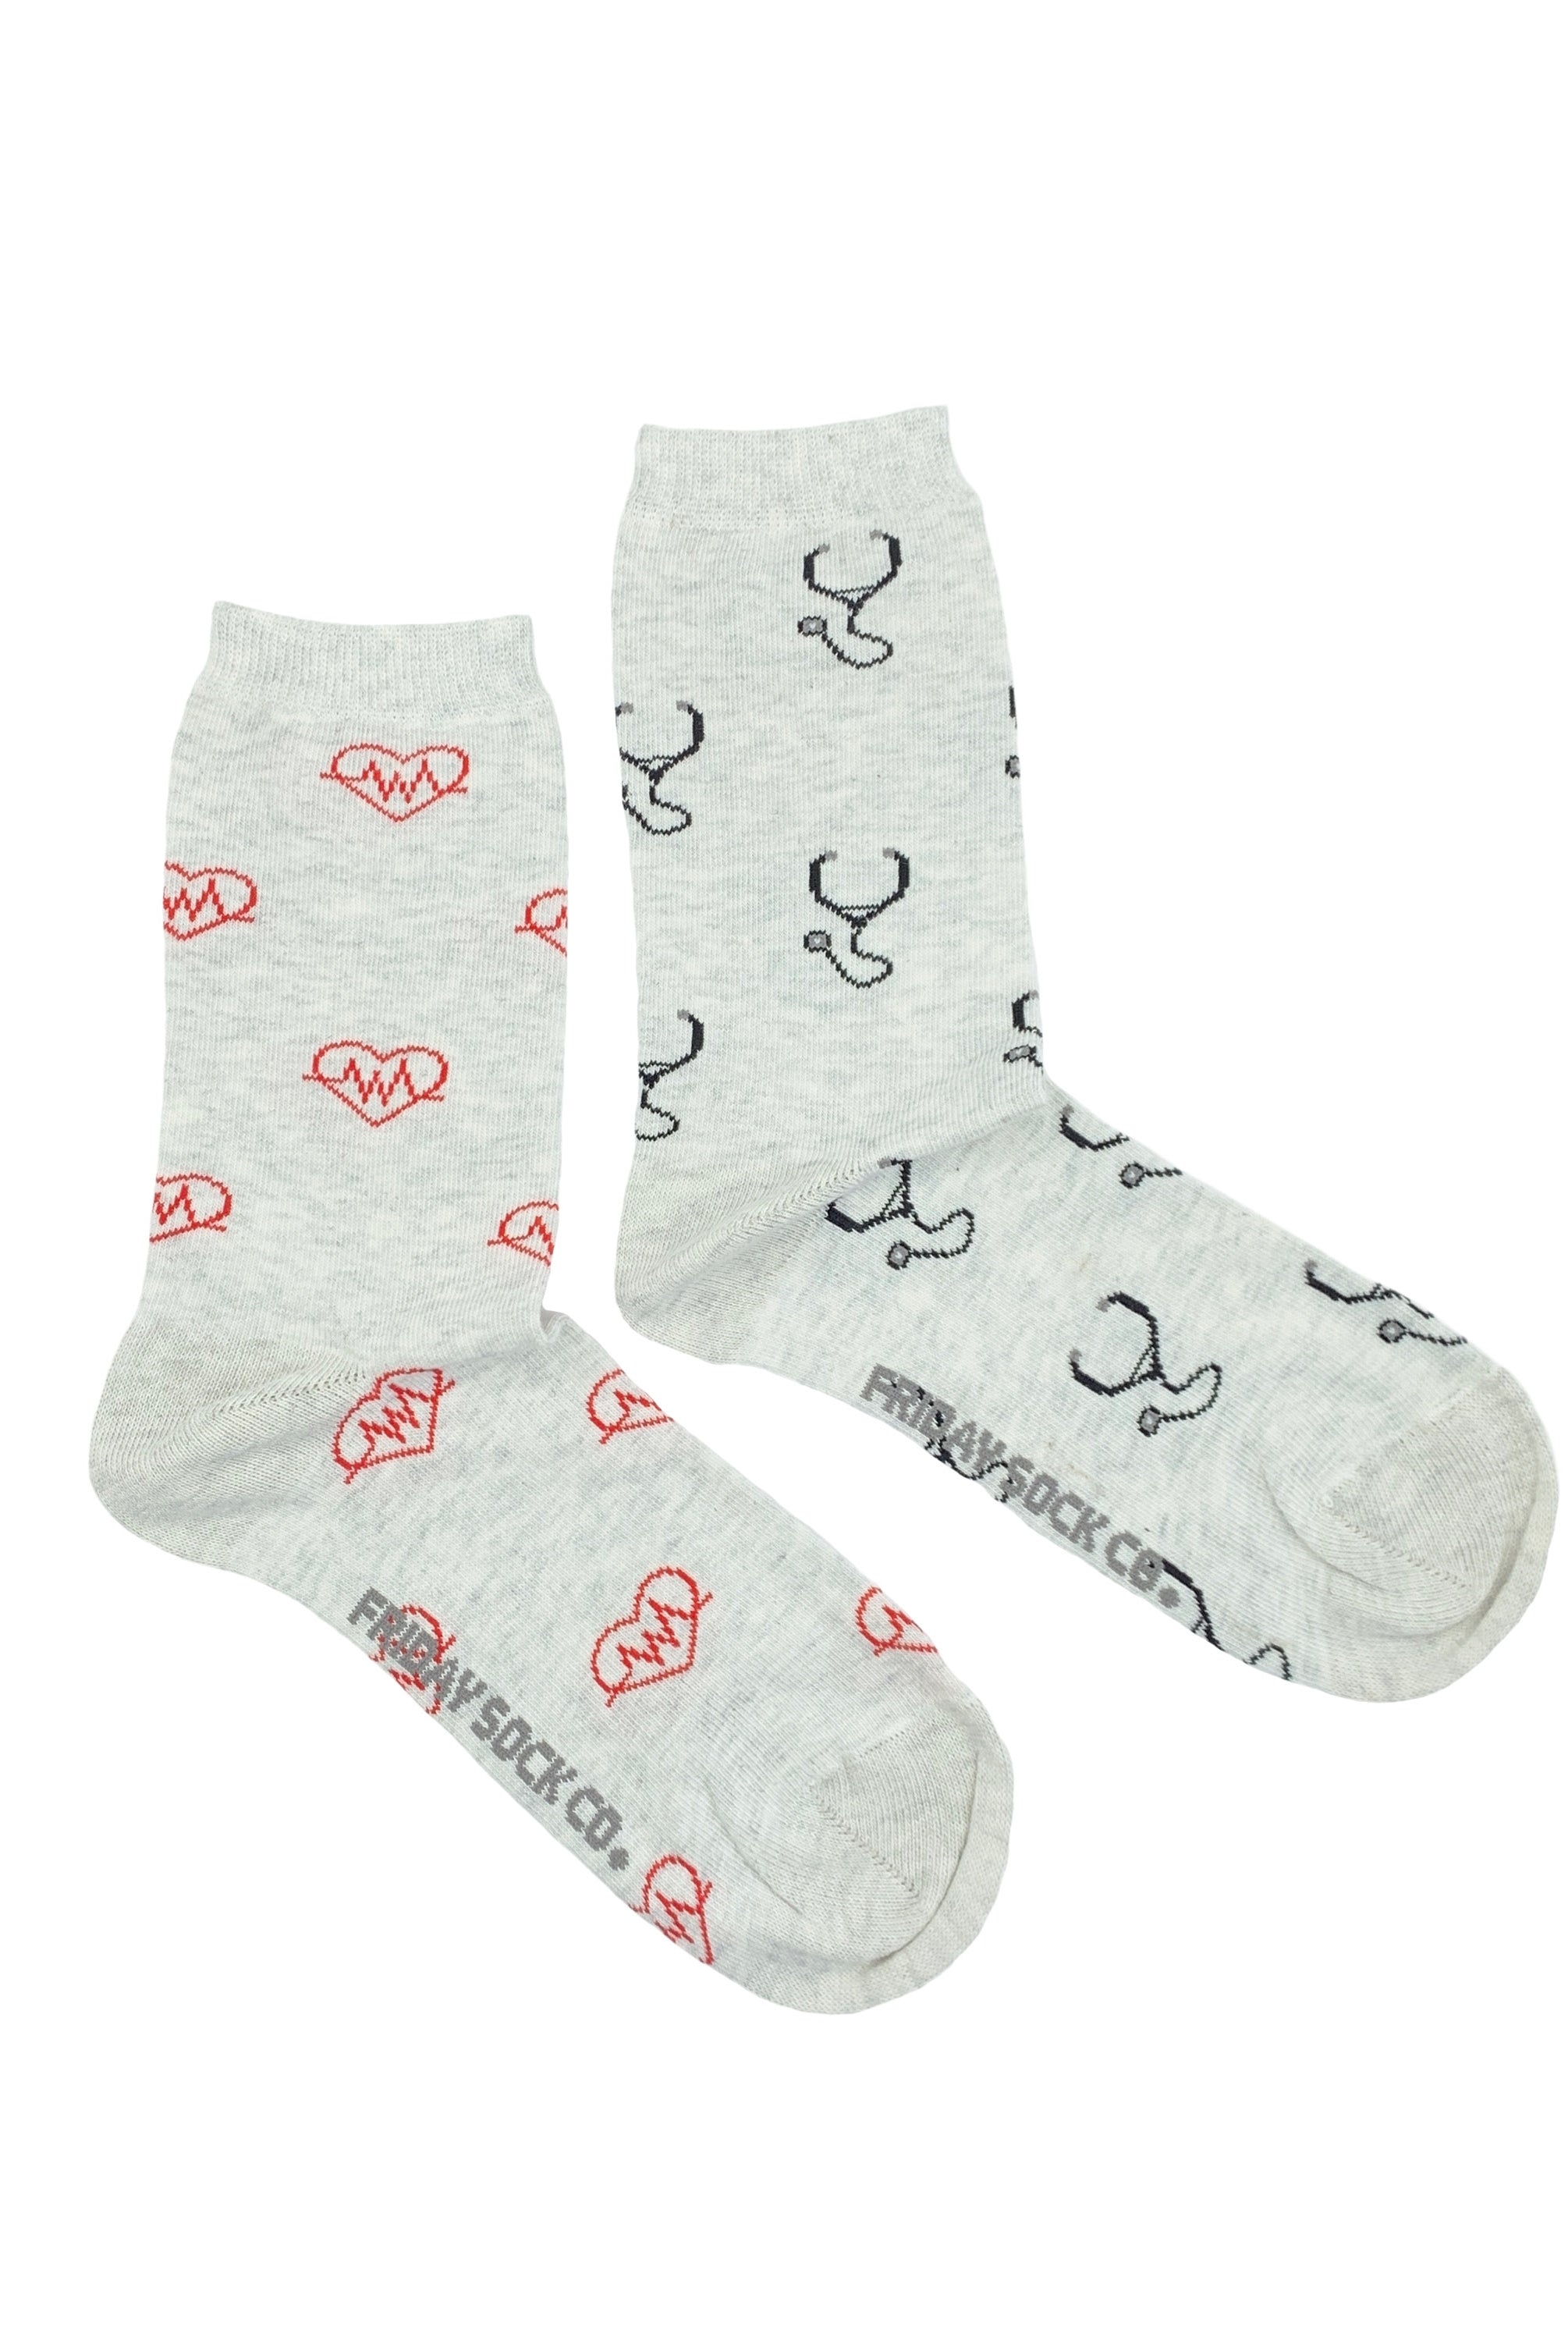 Friday Sock Co Healthcare Socks Ethical Apex Boutique